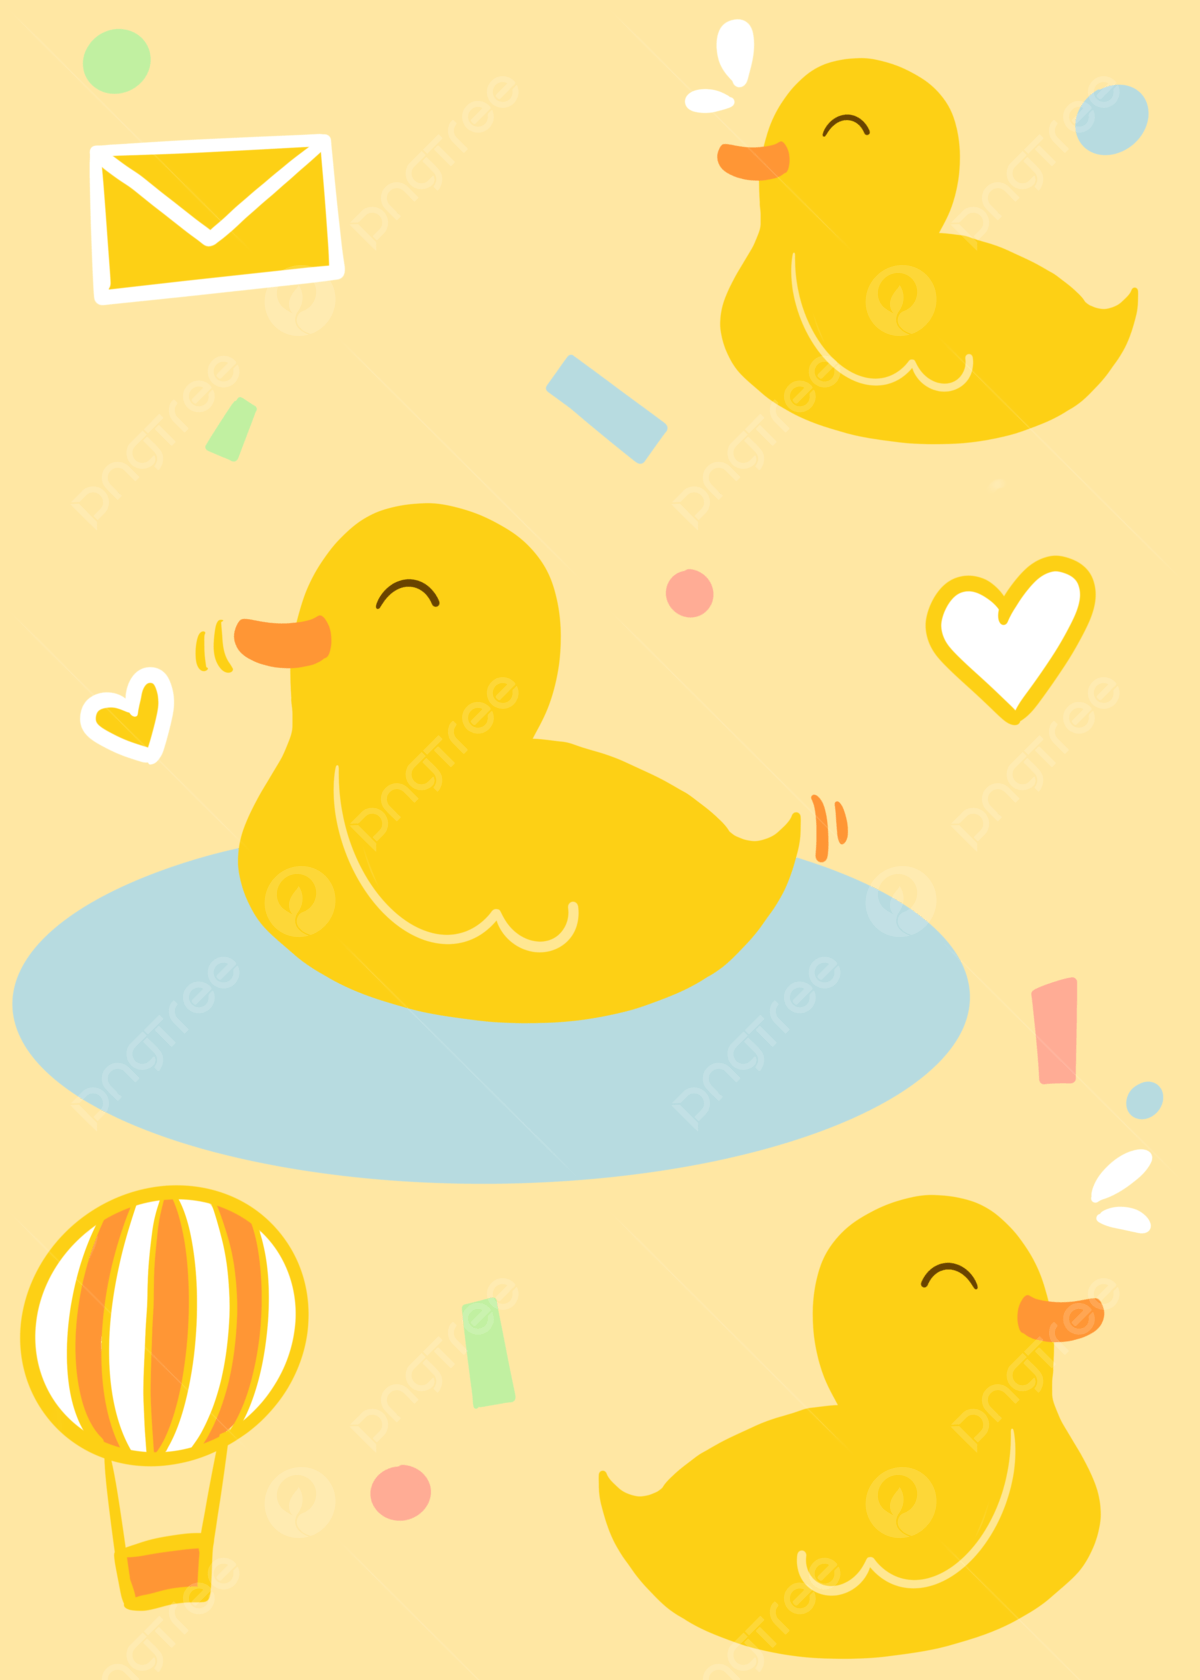 Yellow rubber duck swimming in a pond with a hot air balloon and hearts floating around it - Duck